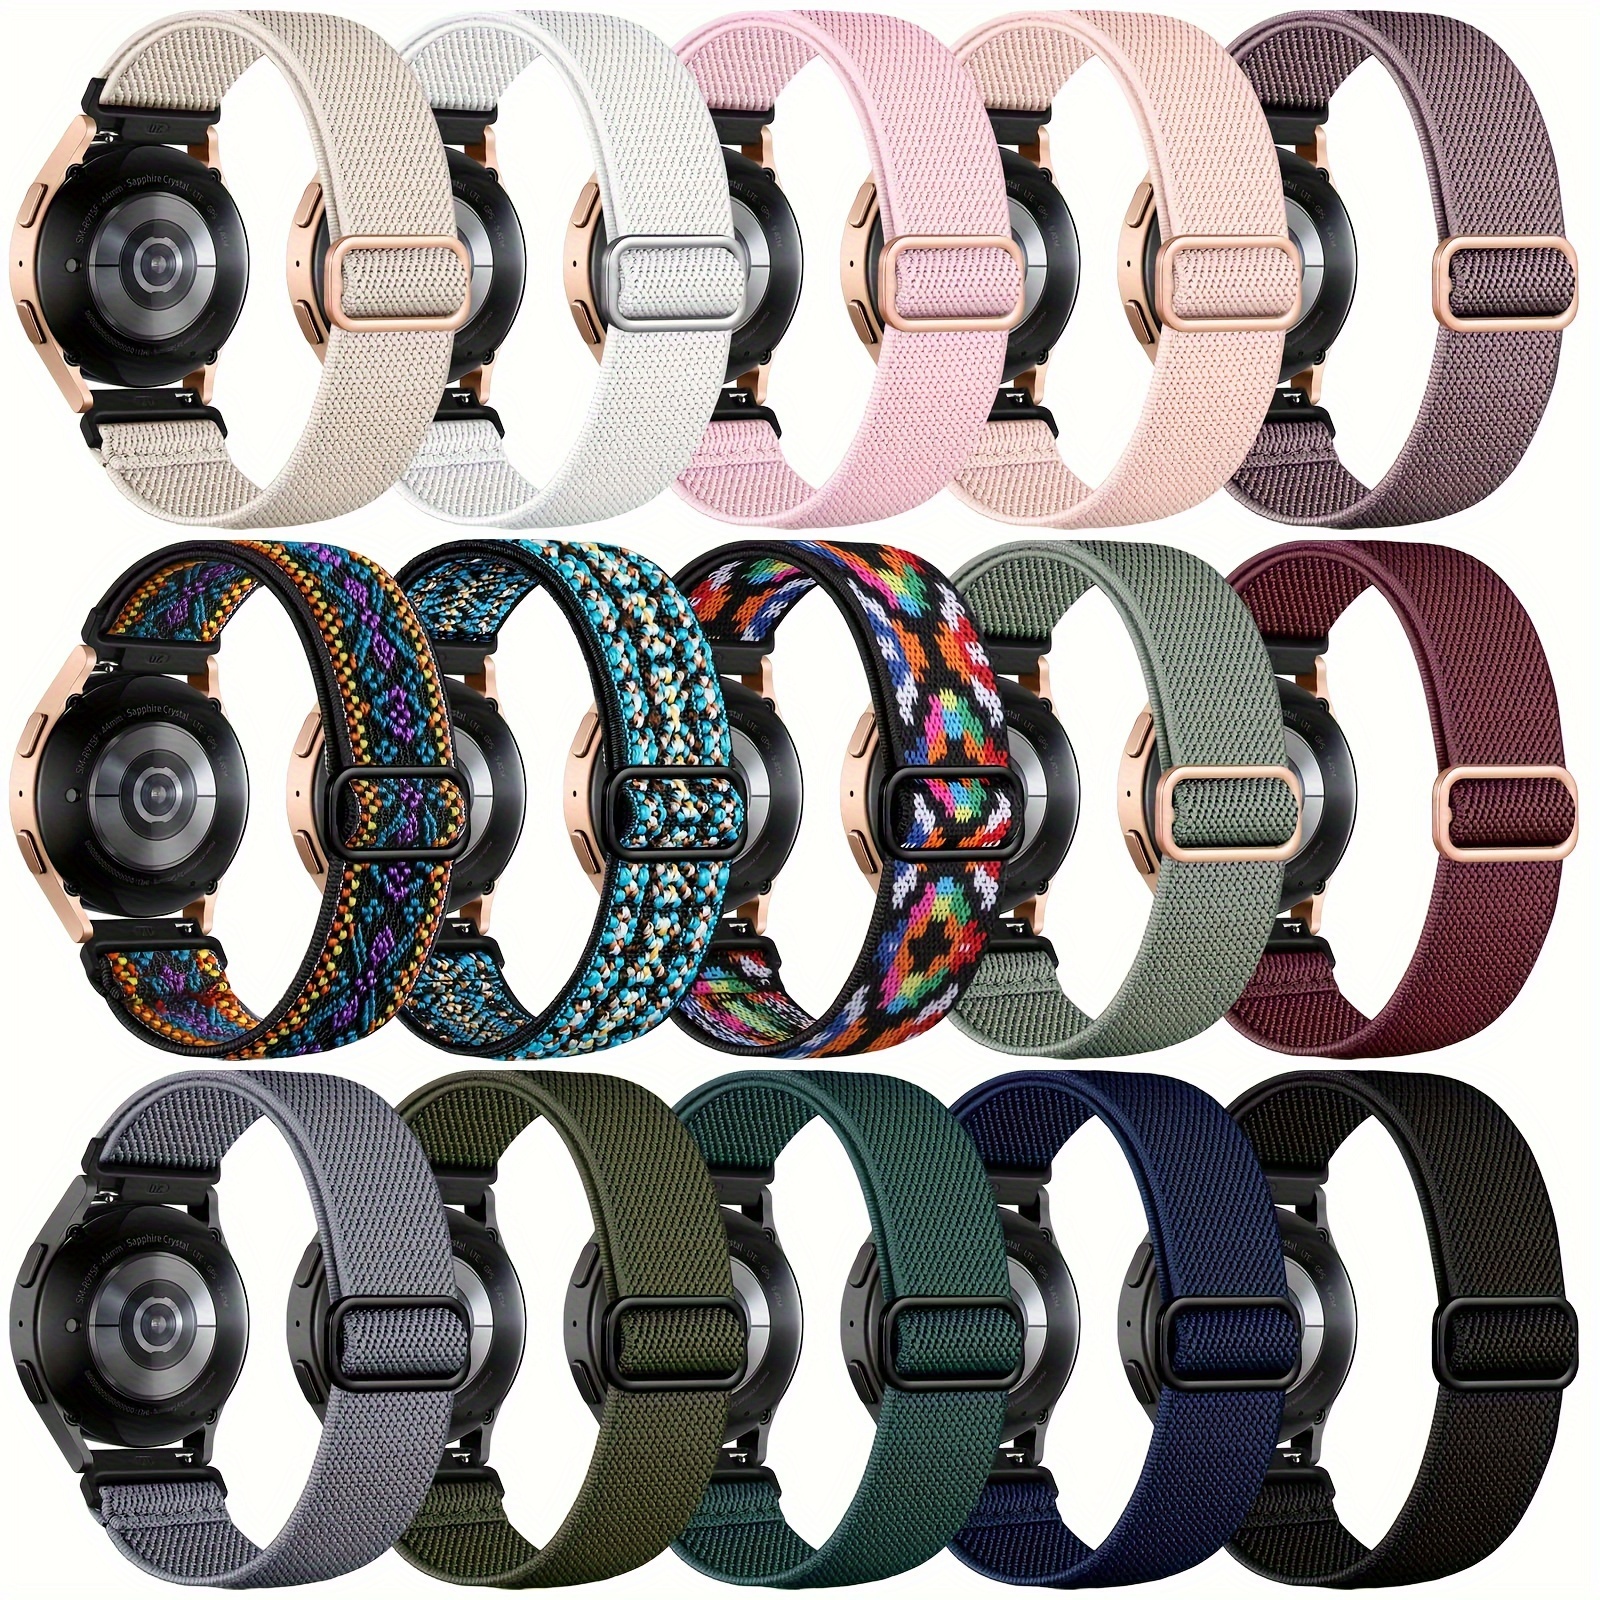 

15 Pack Bands Compatible With Galaxy Watch 4 5 6 Band 40mm 44mm/ Pro Band 45mm/watch 6 Classic/watch 4 Classic/watch 3 41mm/active 2, 20mm Soft Nylon Sport Band.